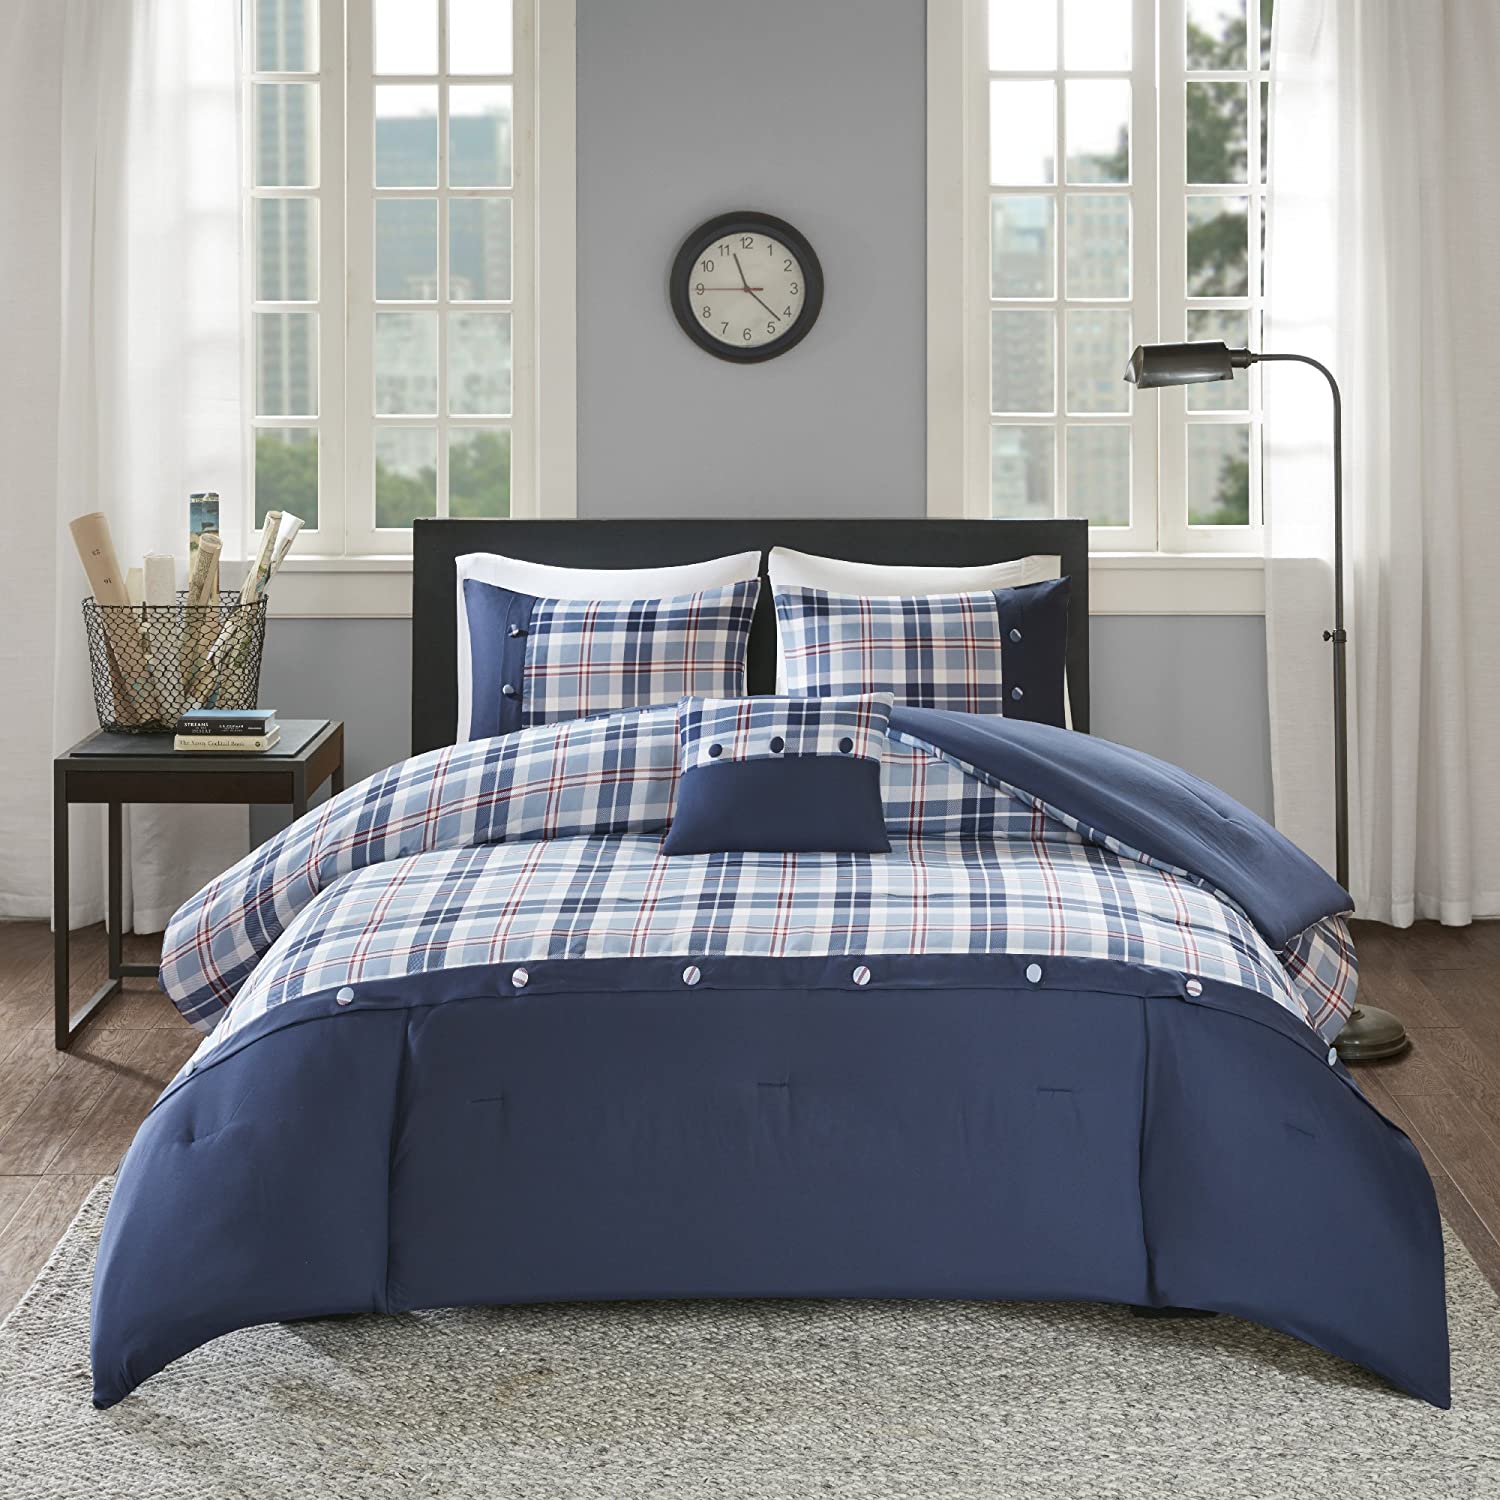 Details about   Comfort Spaces Comforter Set All Season Ultra Soft Hypoallergenic Microfiber Pip 